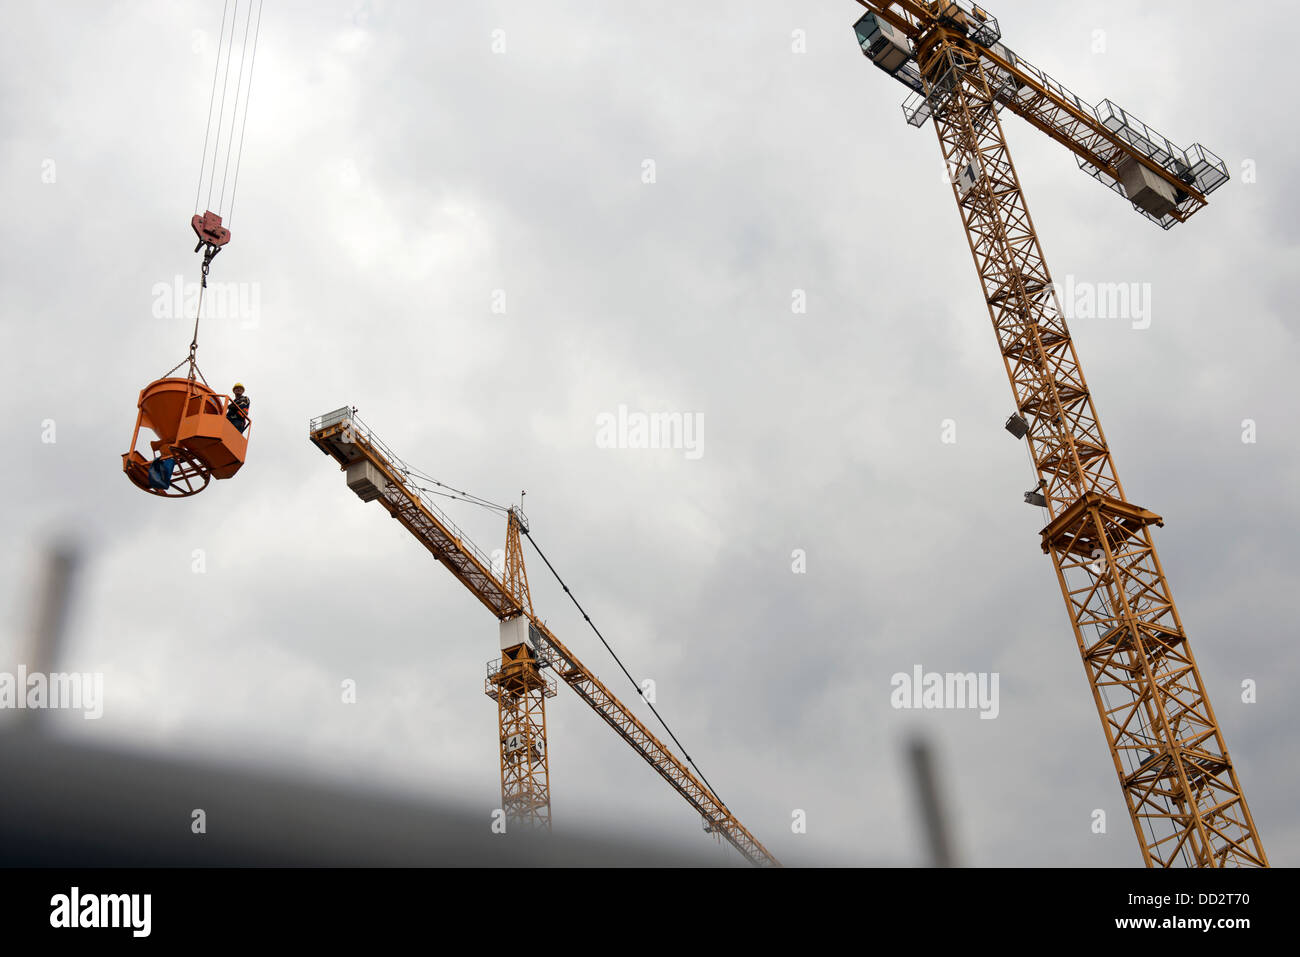 Workman operating a concrete bucket lifted onto a construction site by tower crane Stock Photo